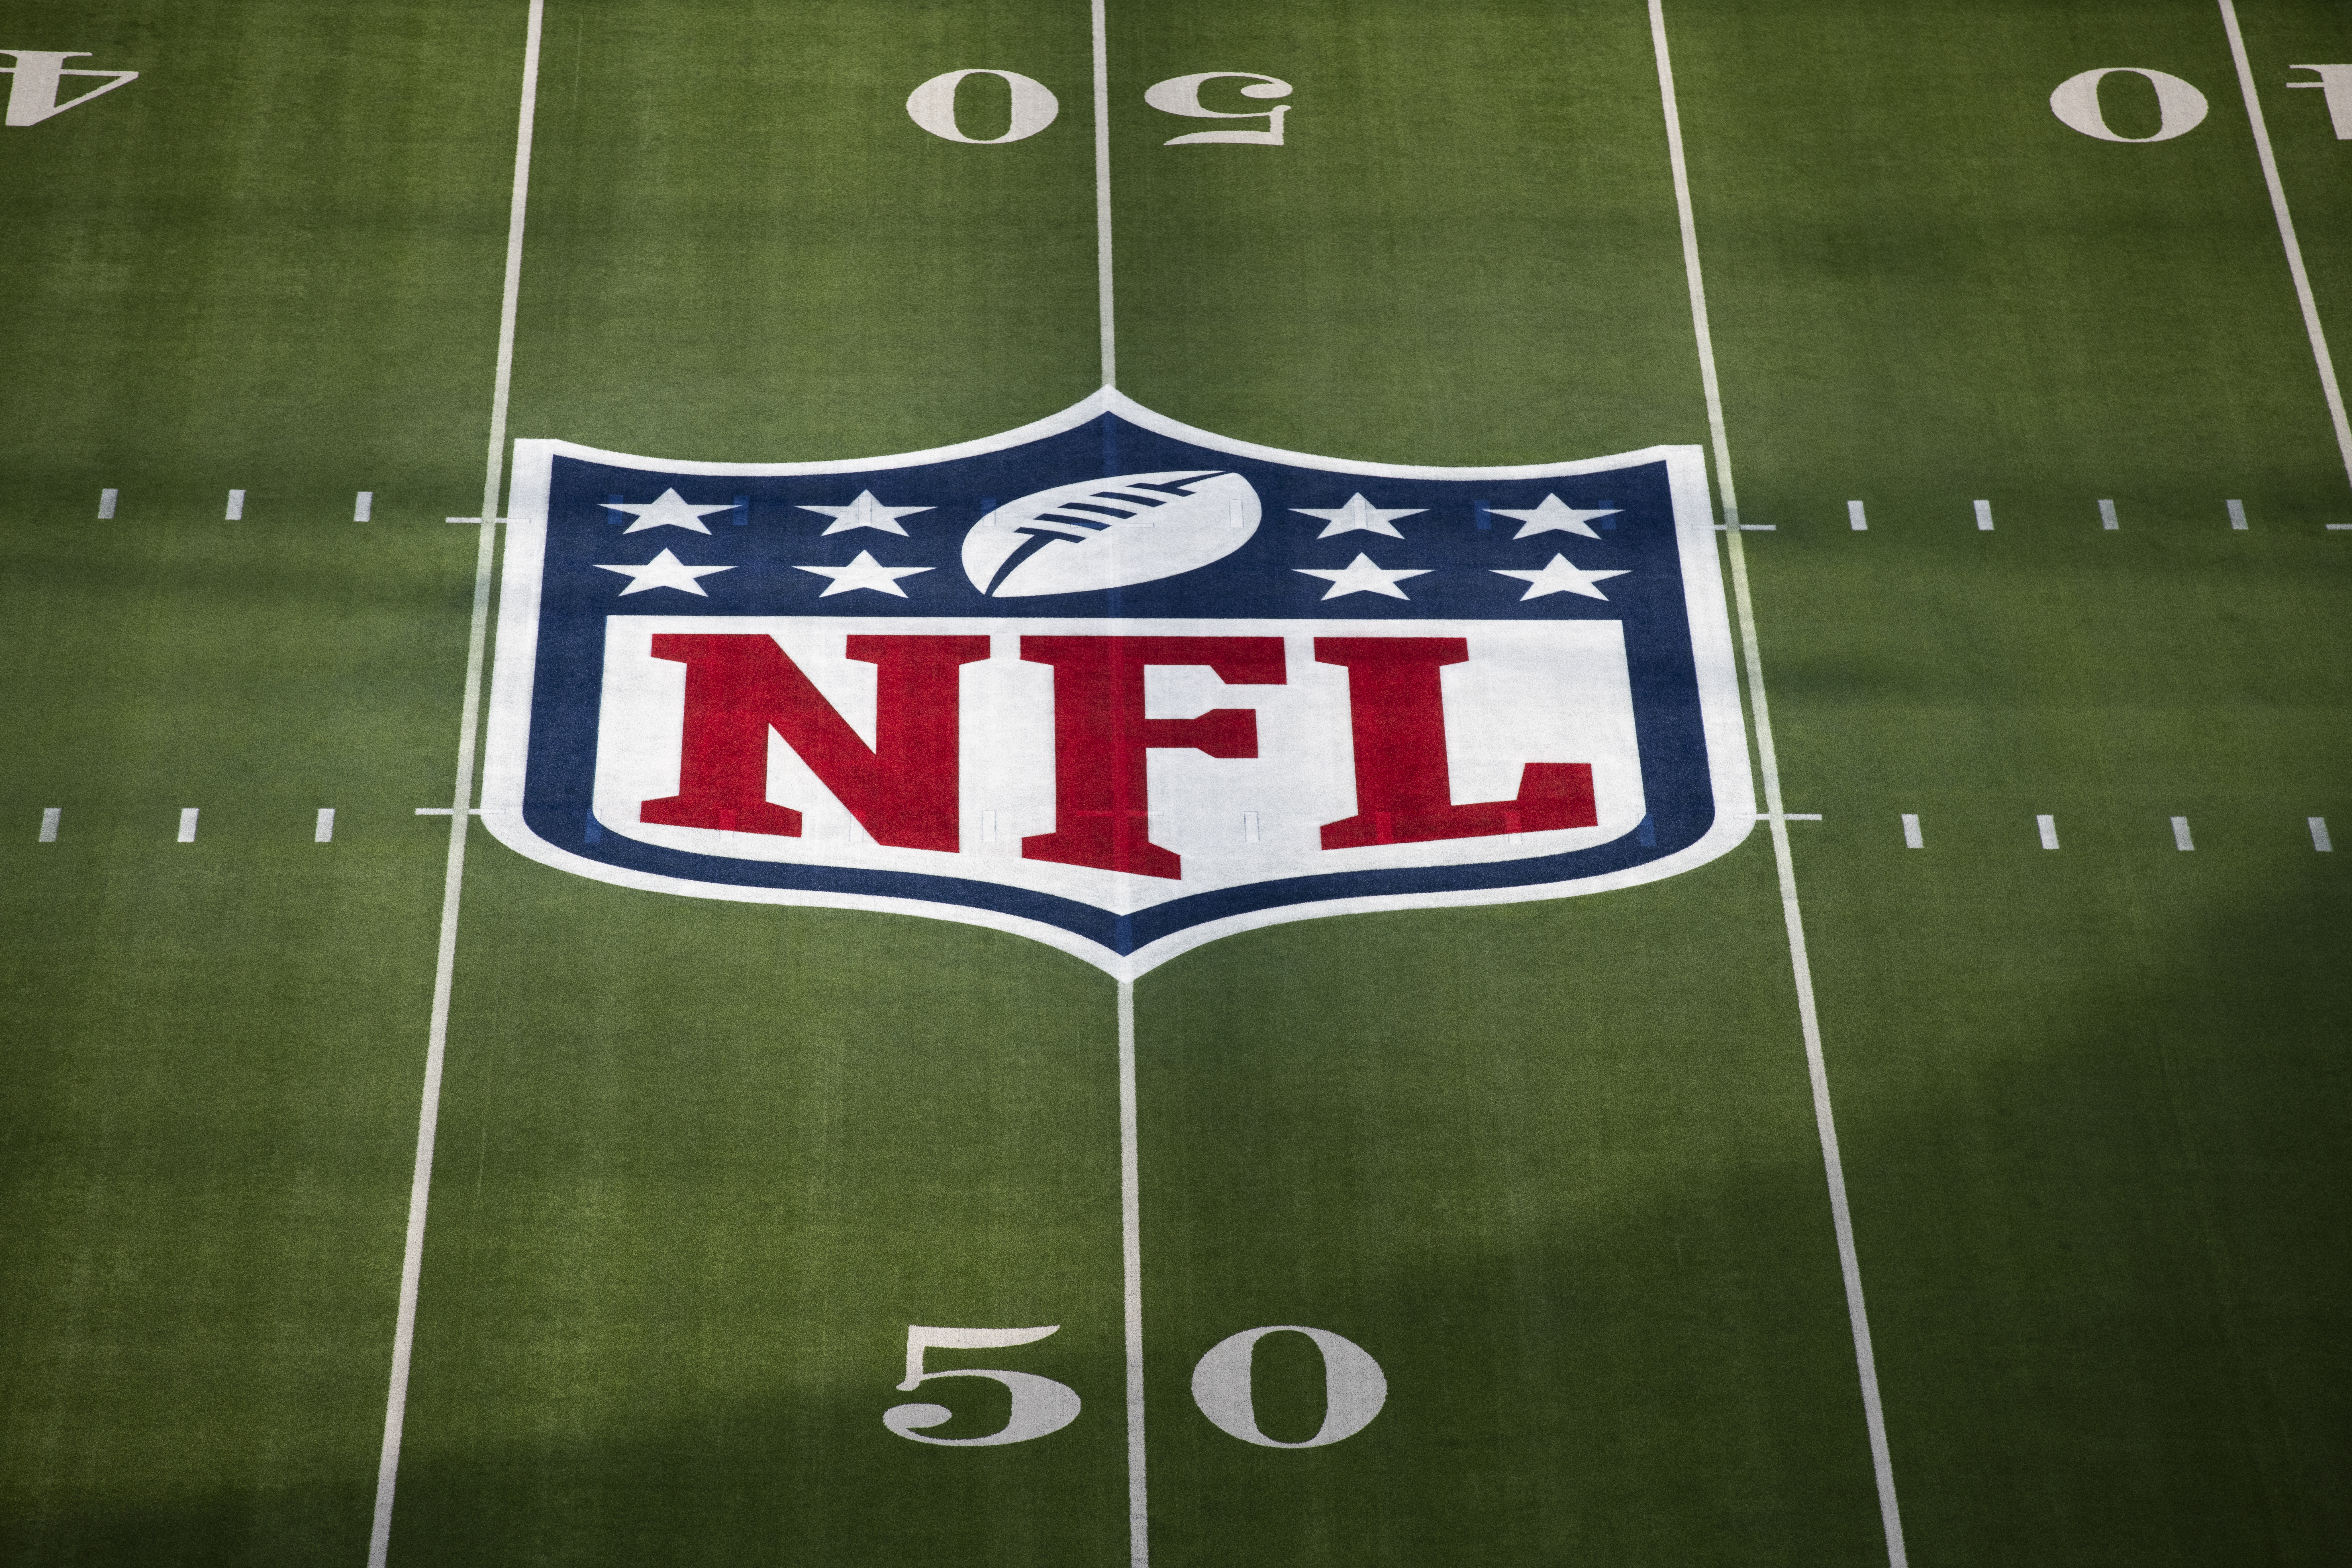 Detroit, Green Bay and Washington Considered Finalists to Host 2024 NFL Draft